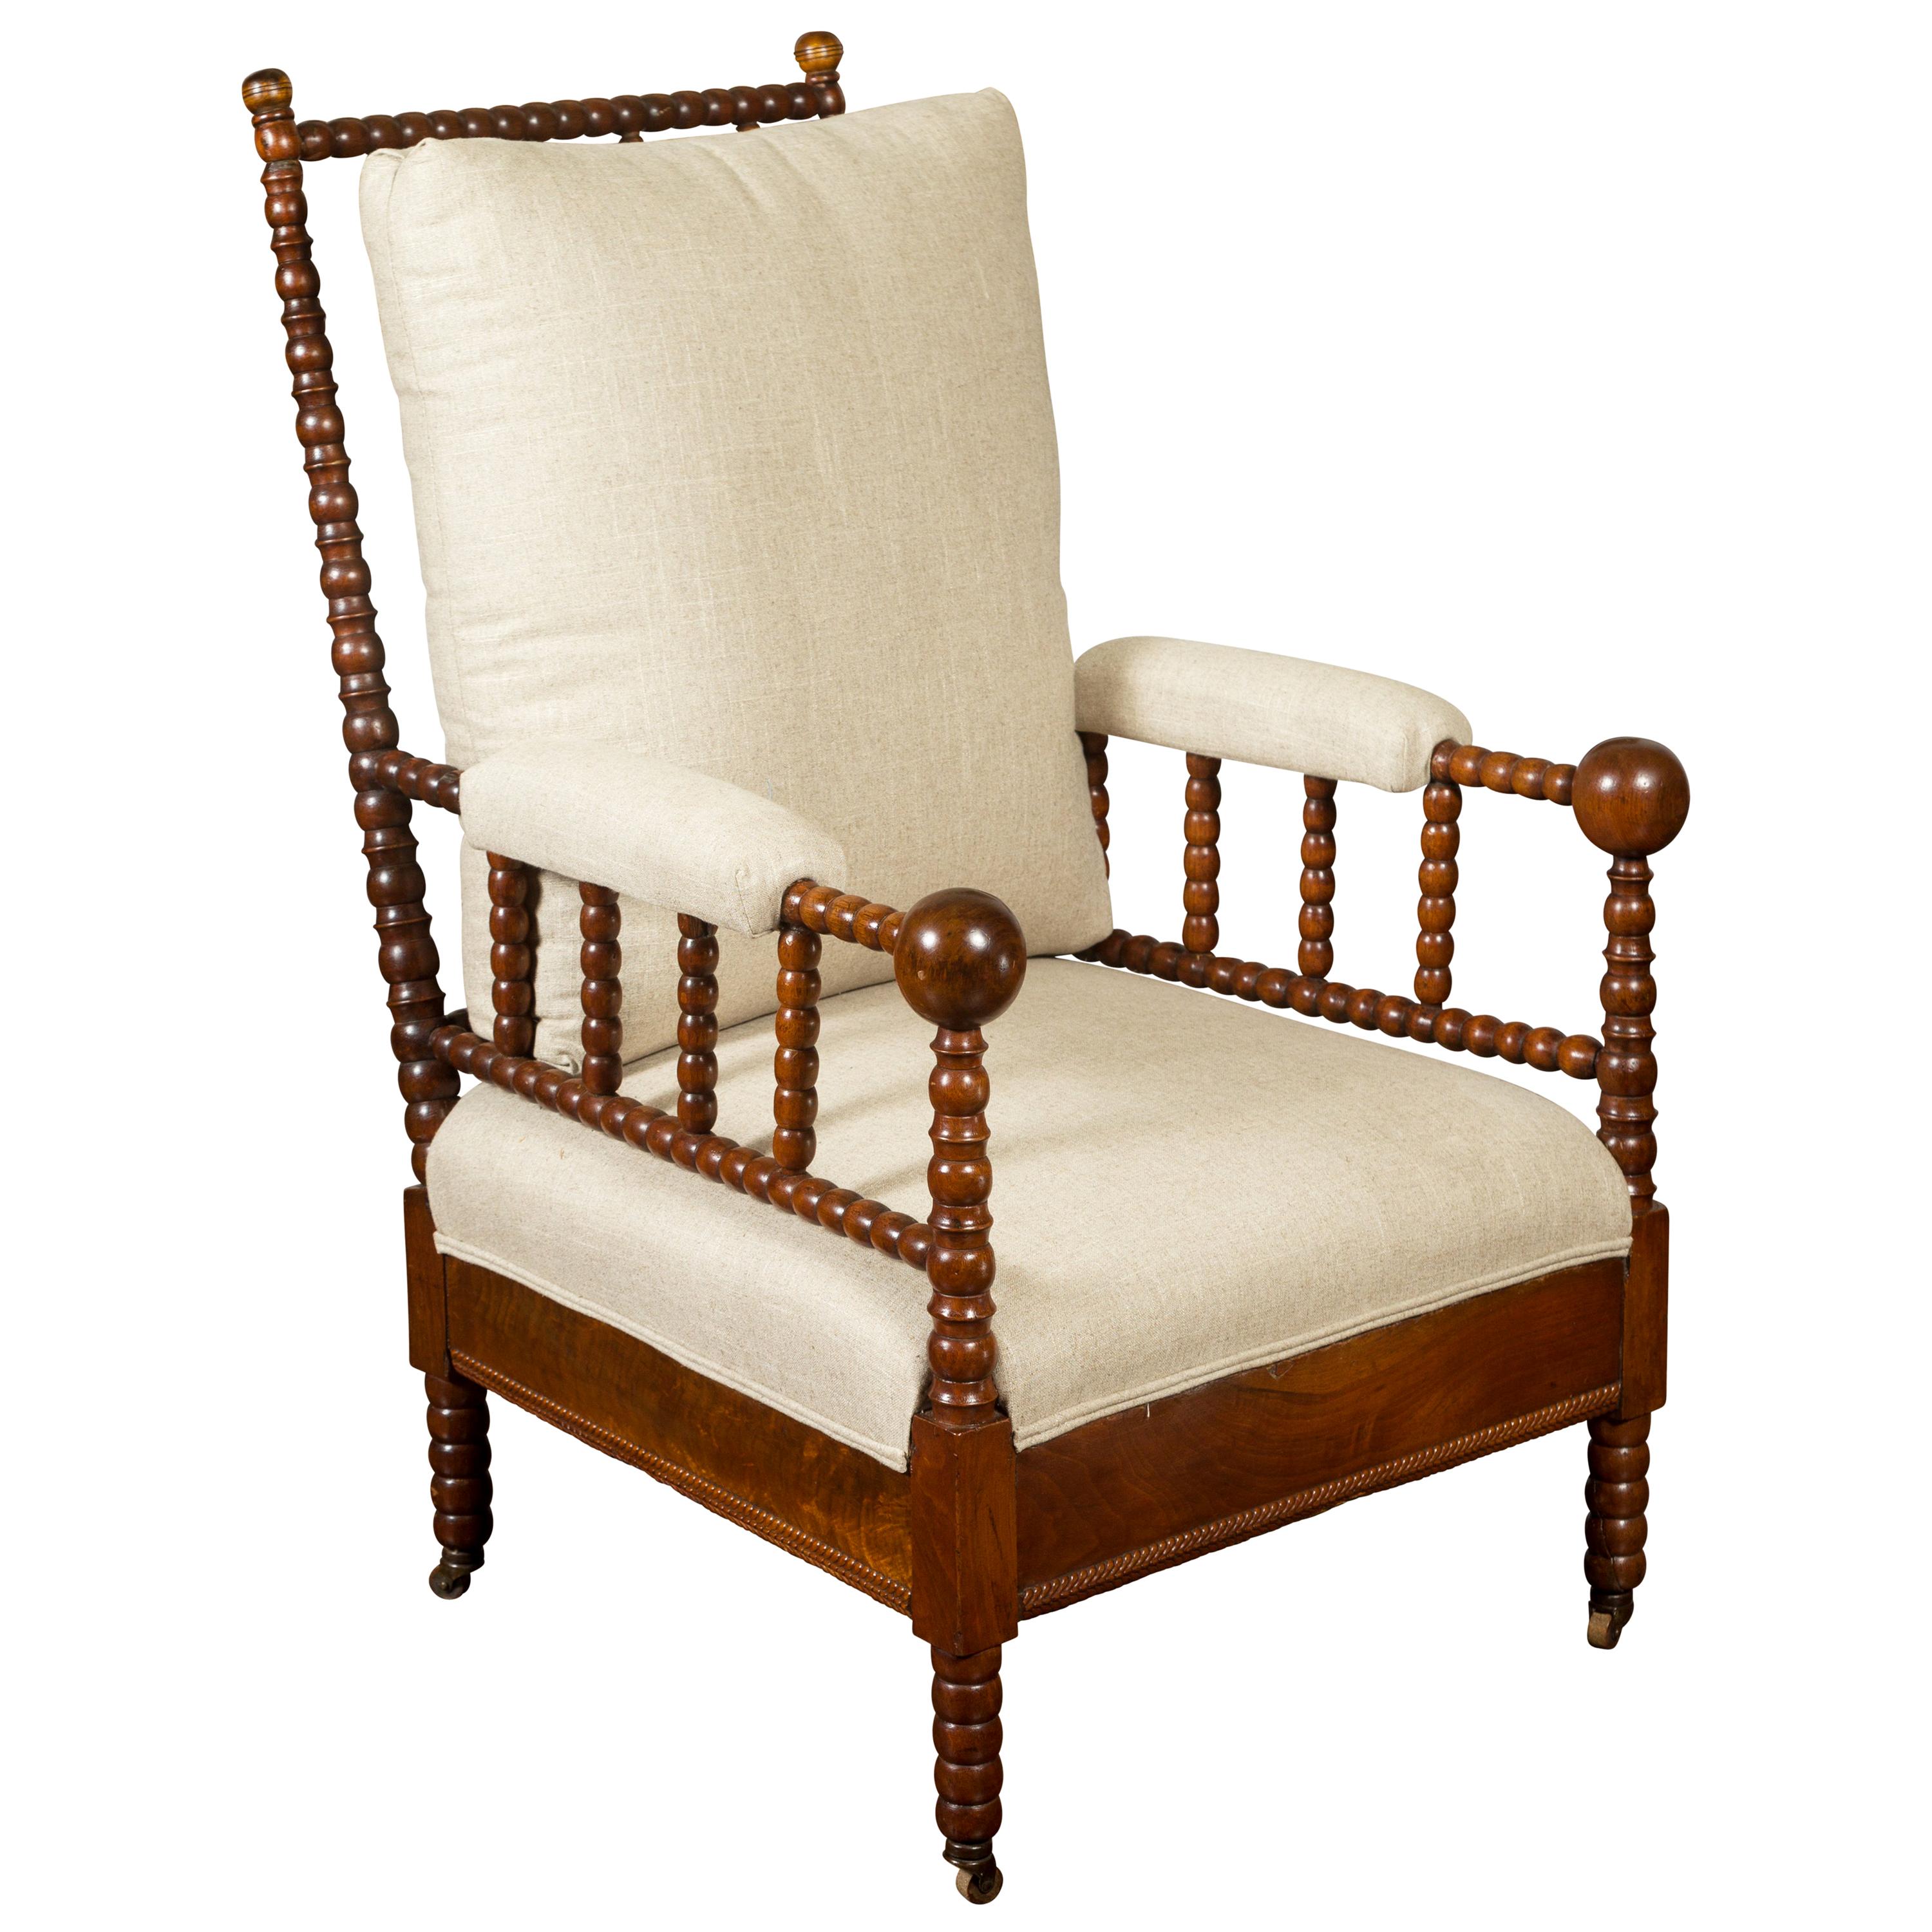 English Walnut Bobbin Armchair with New Upholstery and Casters, circa 1920